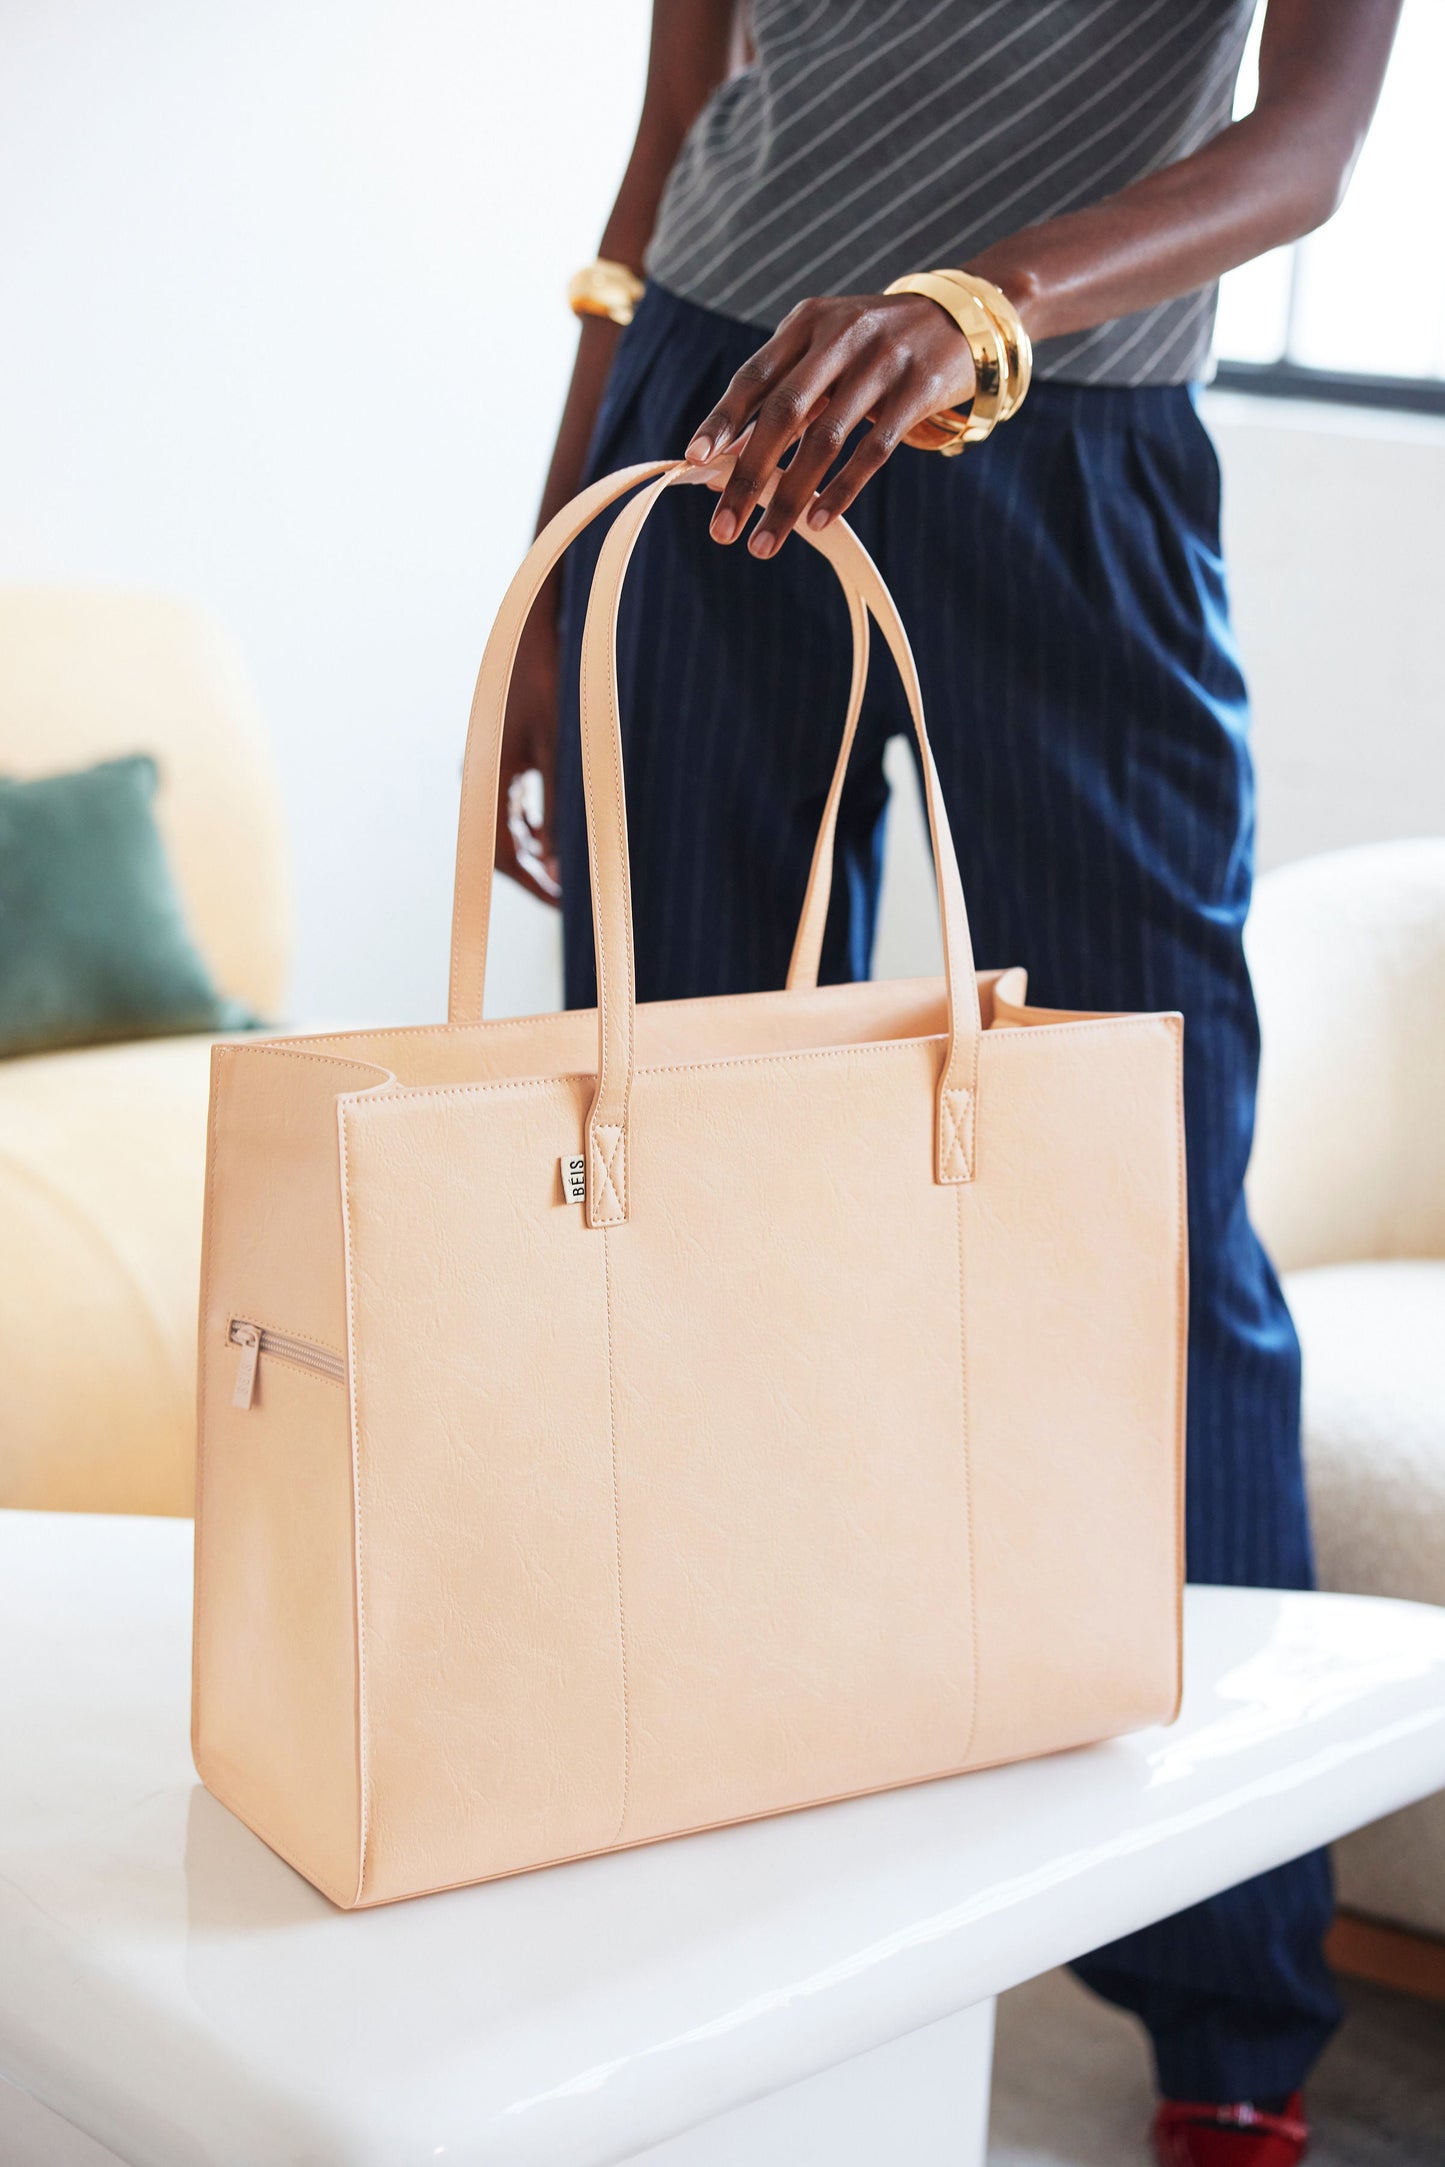 The Large Work Tote in Beige